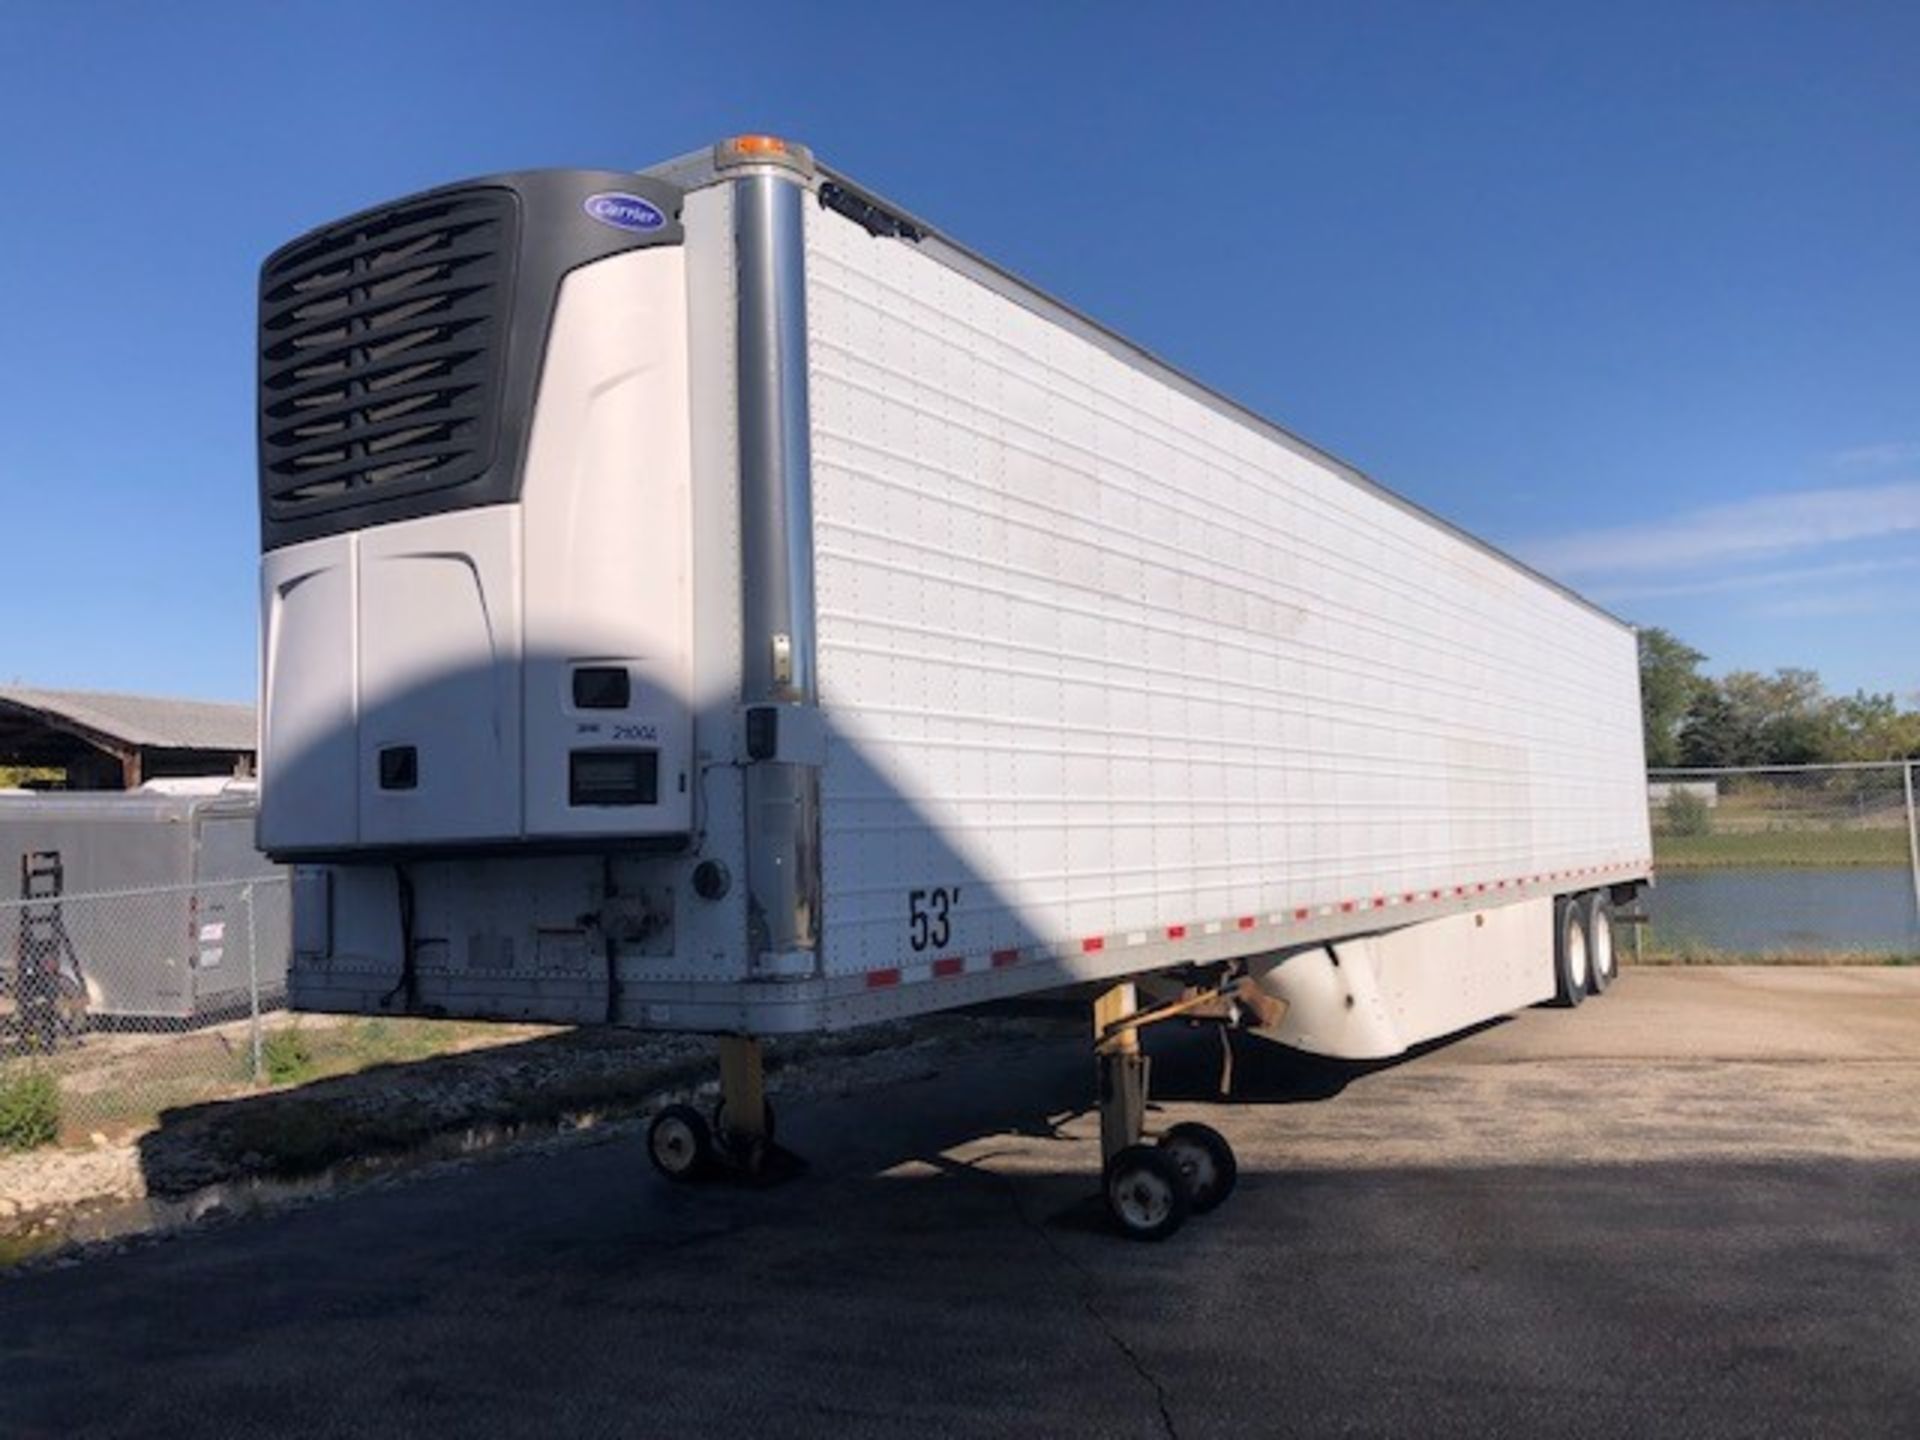 2009 Great Dane Refrigerated Trailer, VIN#: 1GRAA0626AW702306, M/N SUP-111411G53, with Carrier Refer